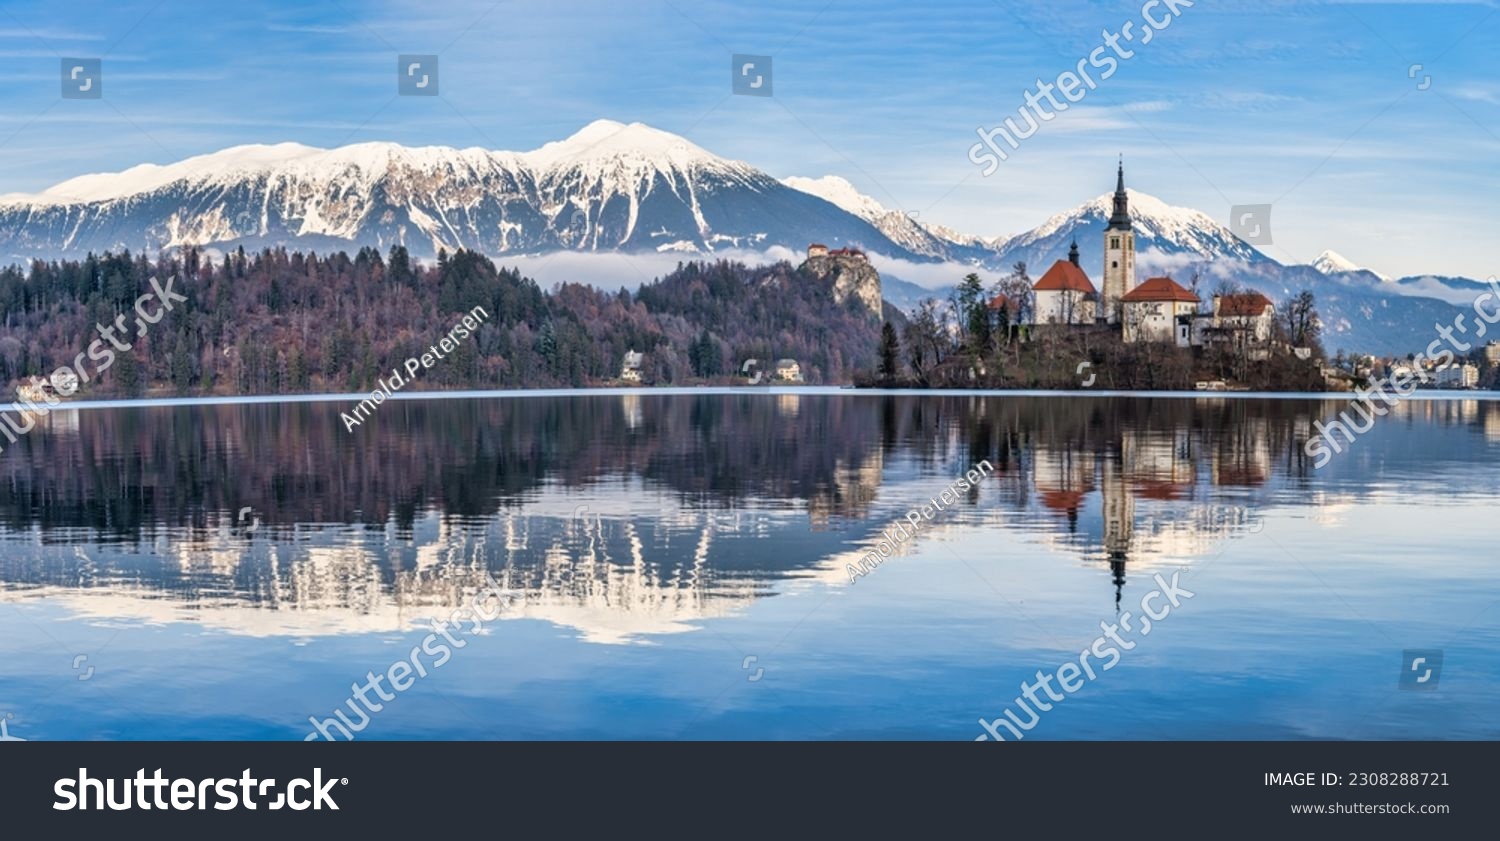 Panorama shot of lake Bled island church, bled castle and snow peak mountains during a winter afternoon, Bled, Slovenia #2308288721